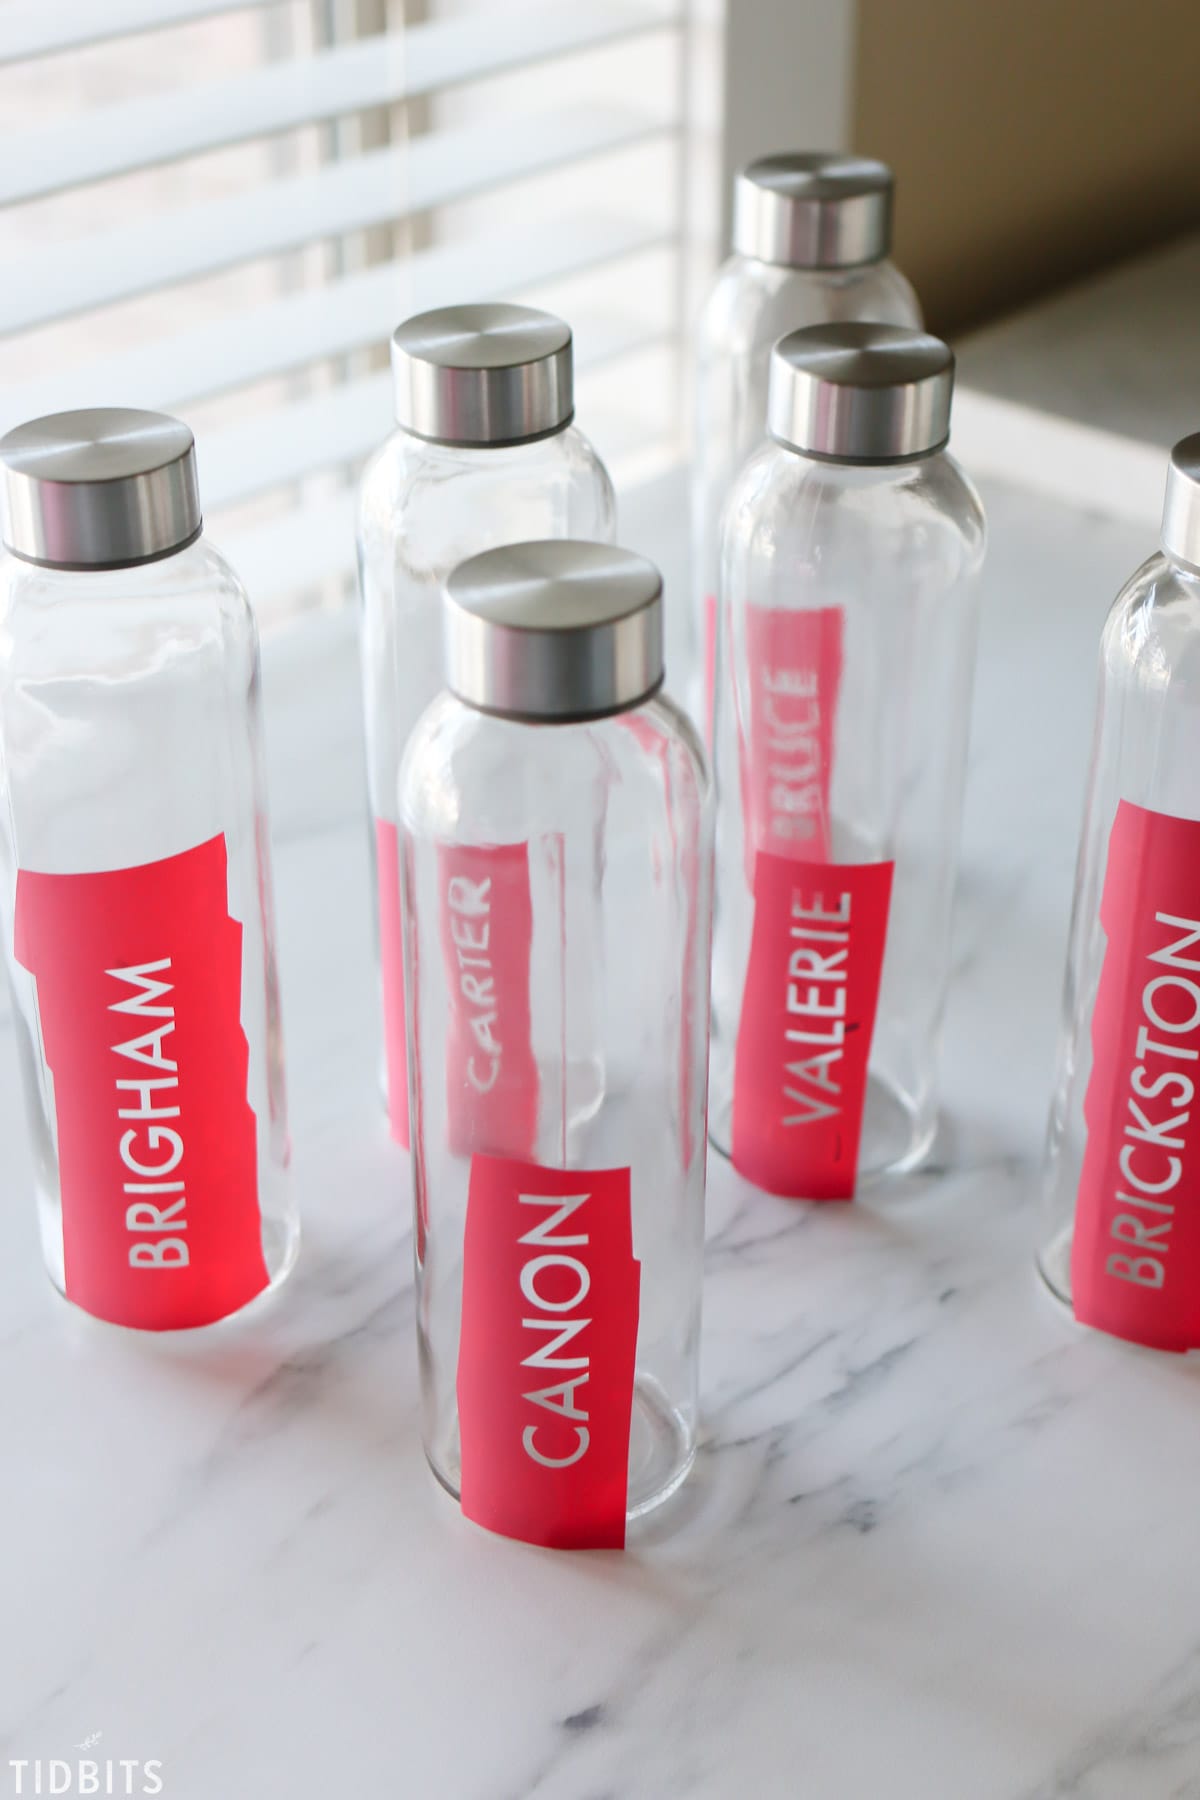 prep for etching name on glass bottles